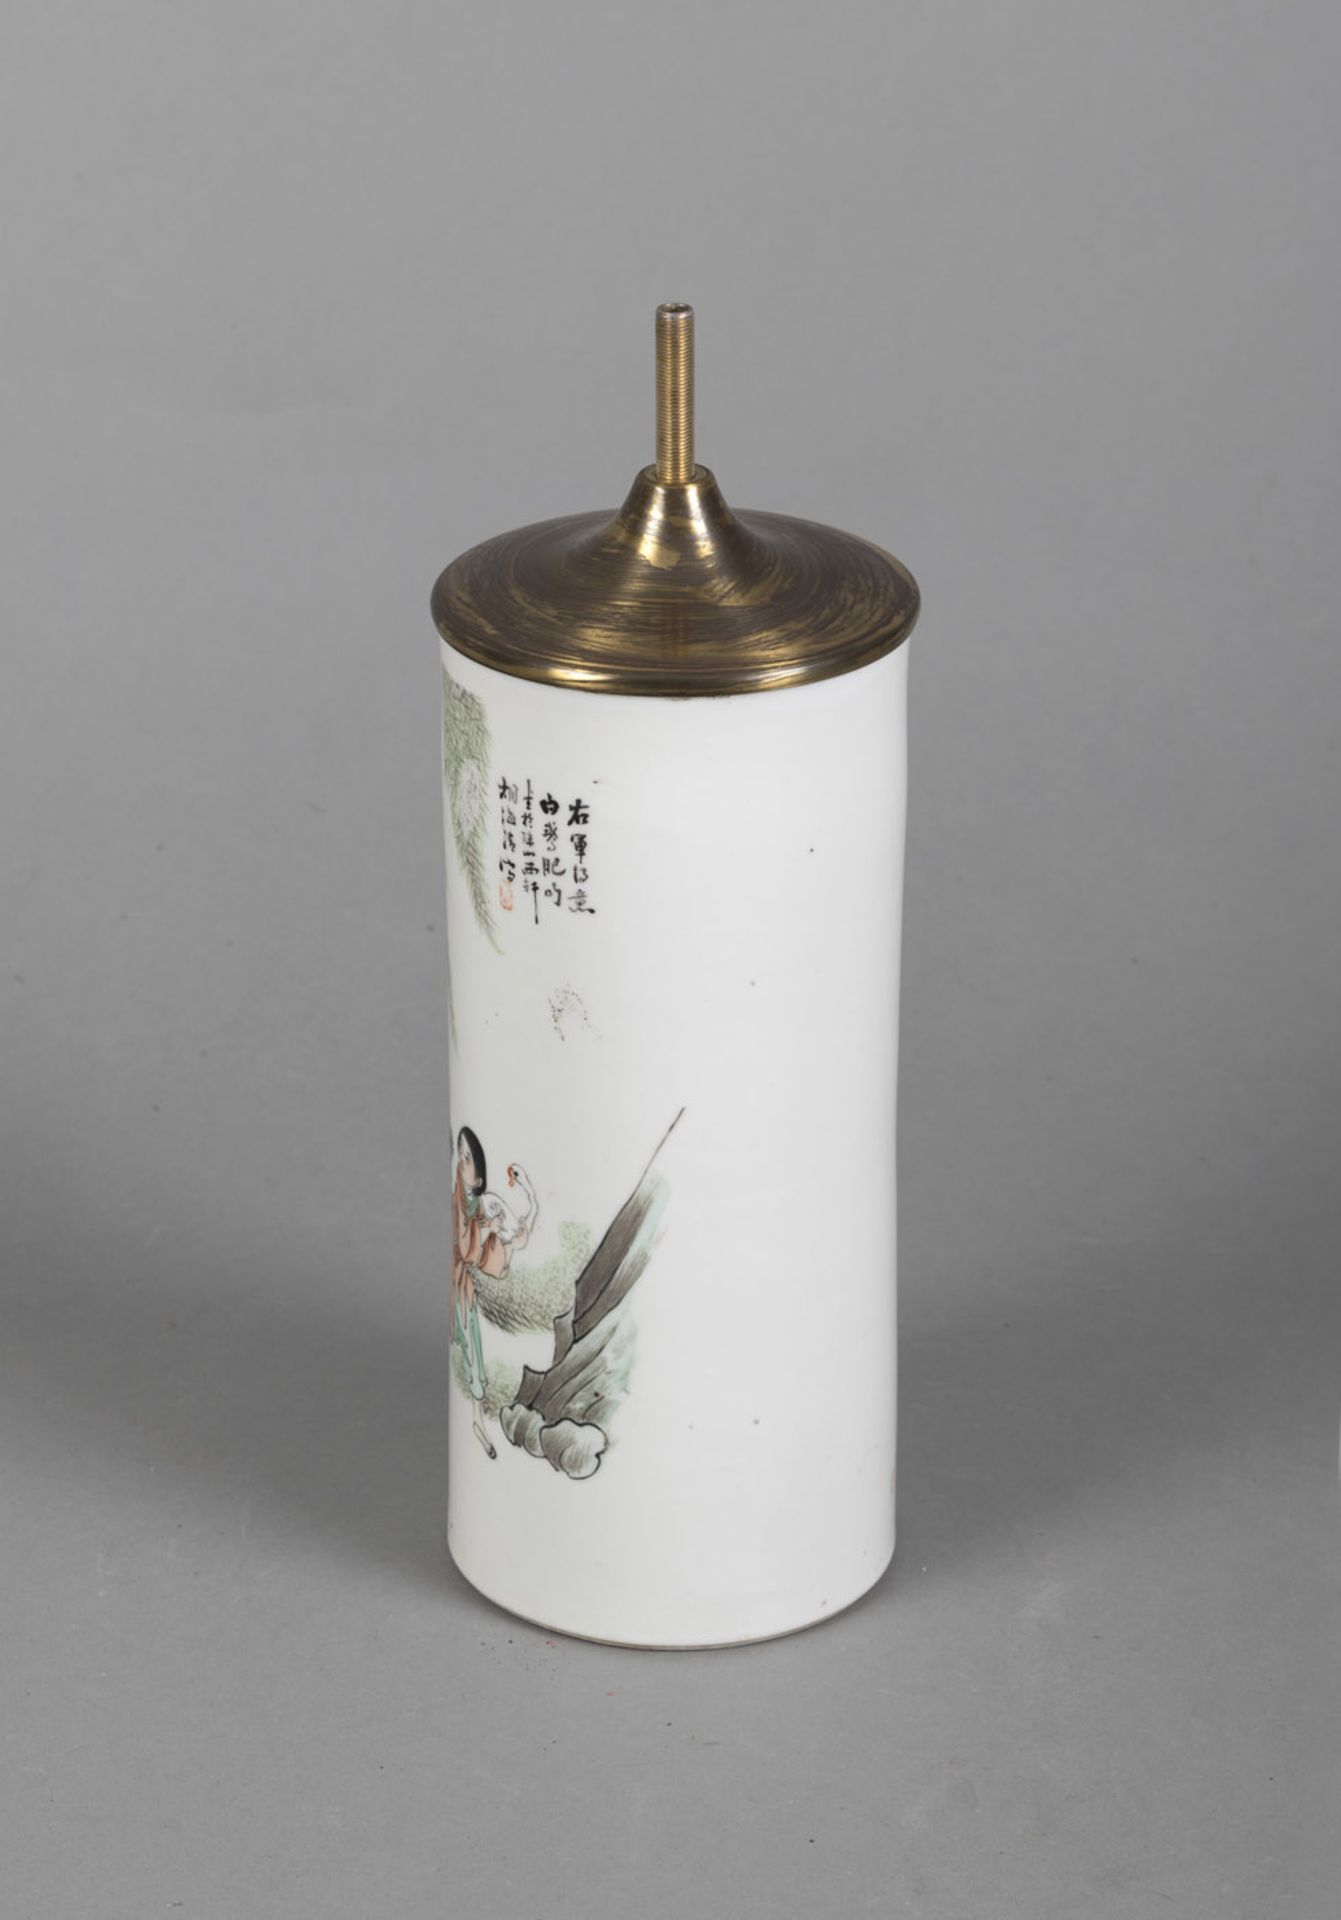 A CYLINDRICAL POLYCHROME PAINTED PORCELAIN HAT STAND DEPICTING 'WANG XIZHI AND HIS GOOSE' - Image 2 of 3